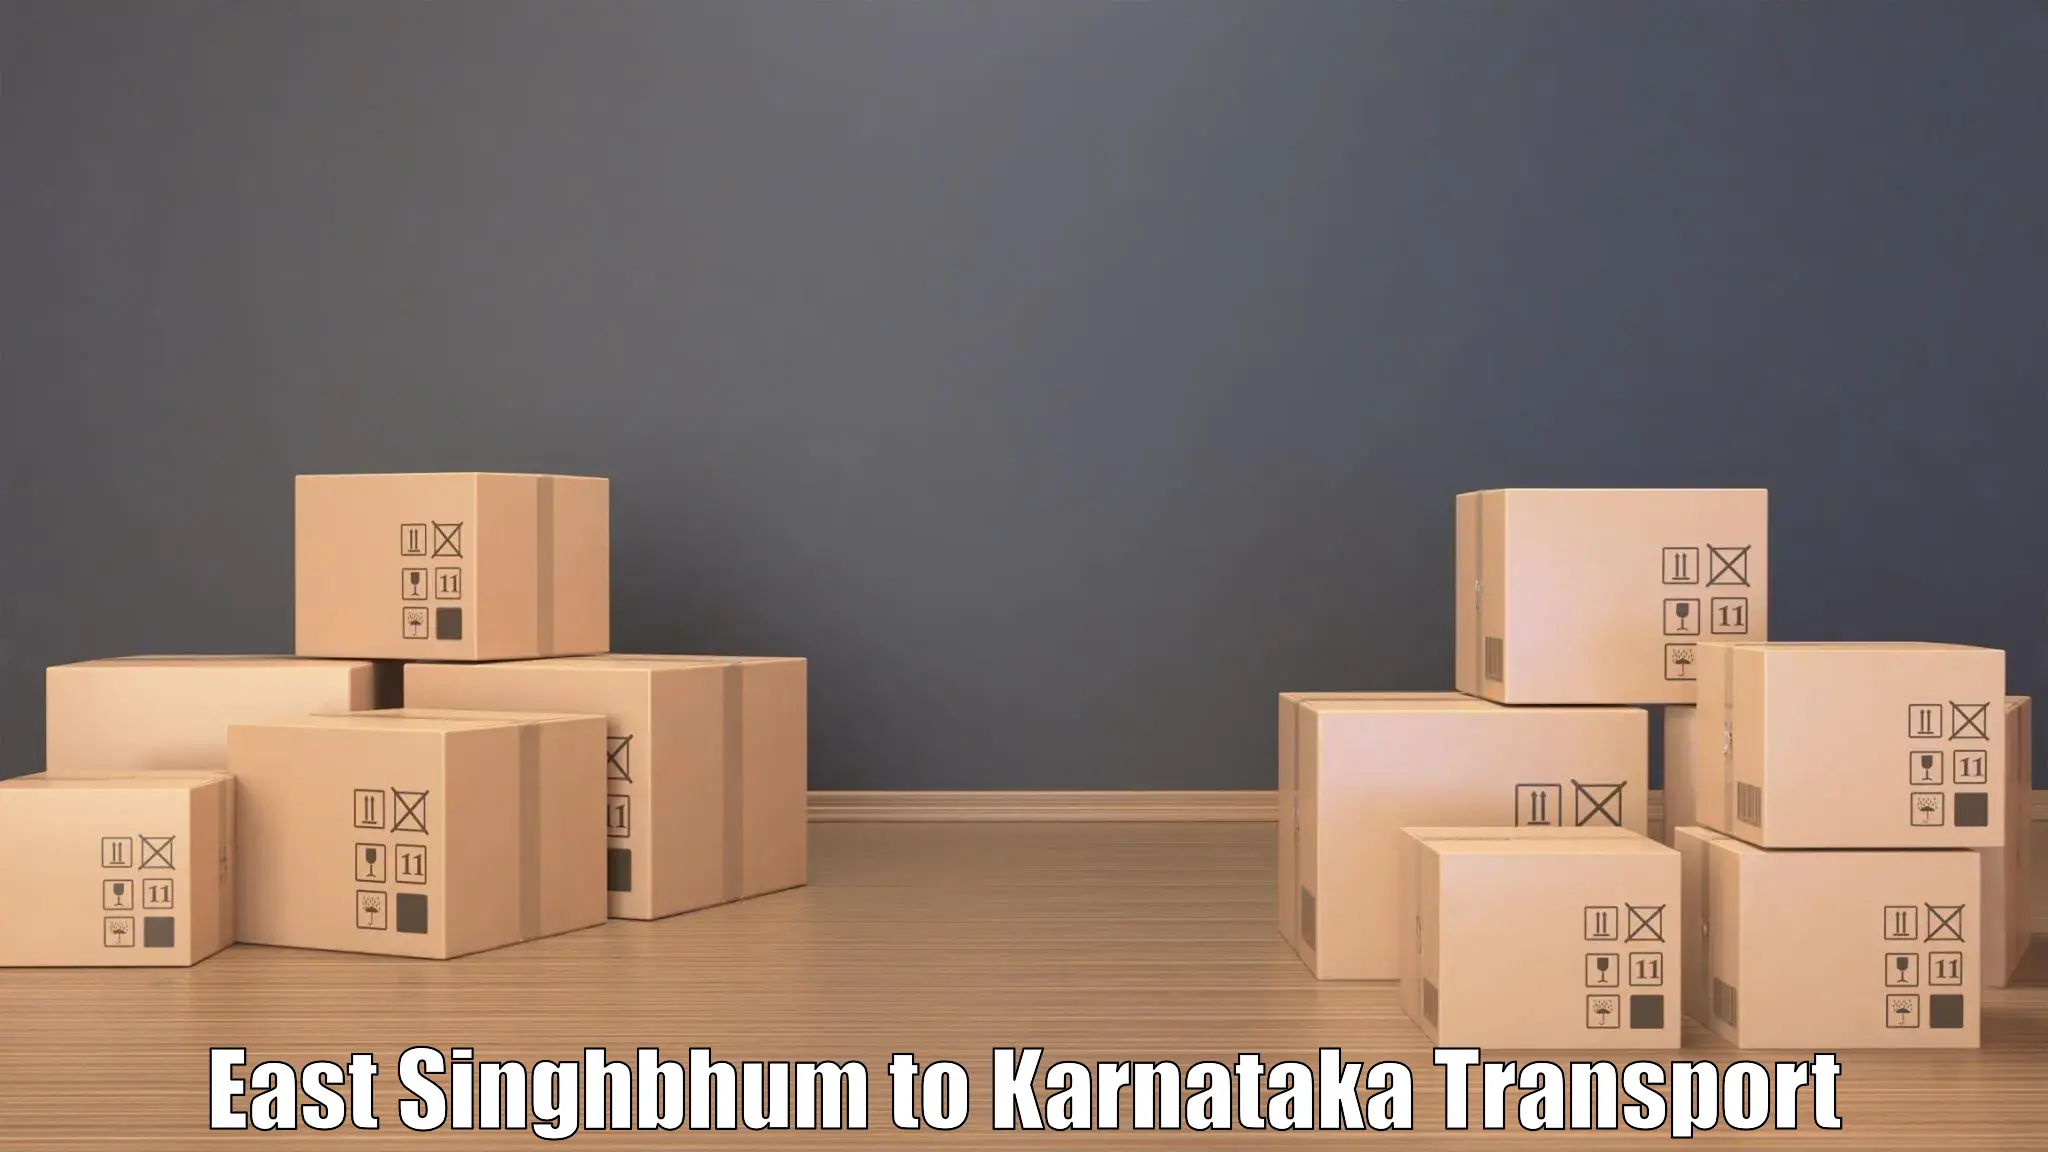 Package delivery services East Singhbhum to Tarikere